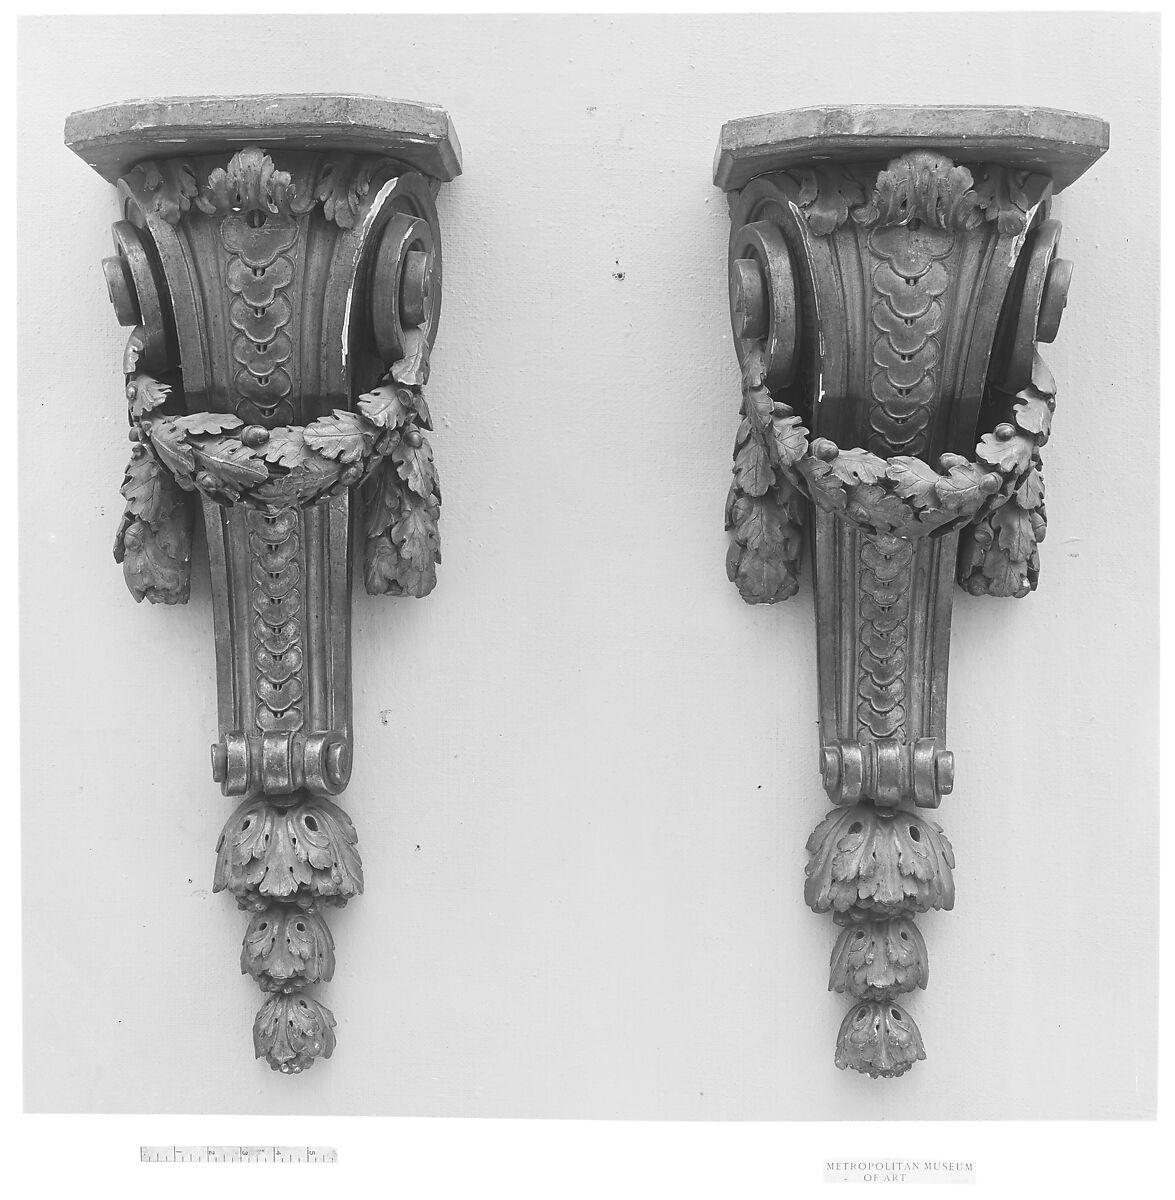 Pair of consoles (consoles d'appliques), Carved and gilded wood, French 